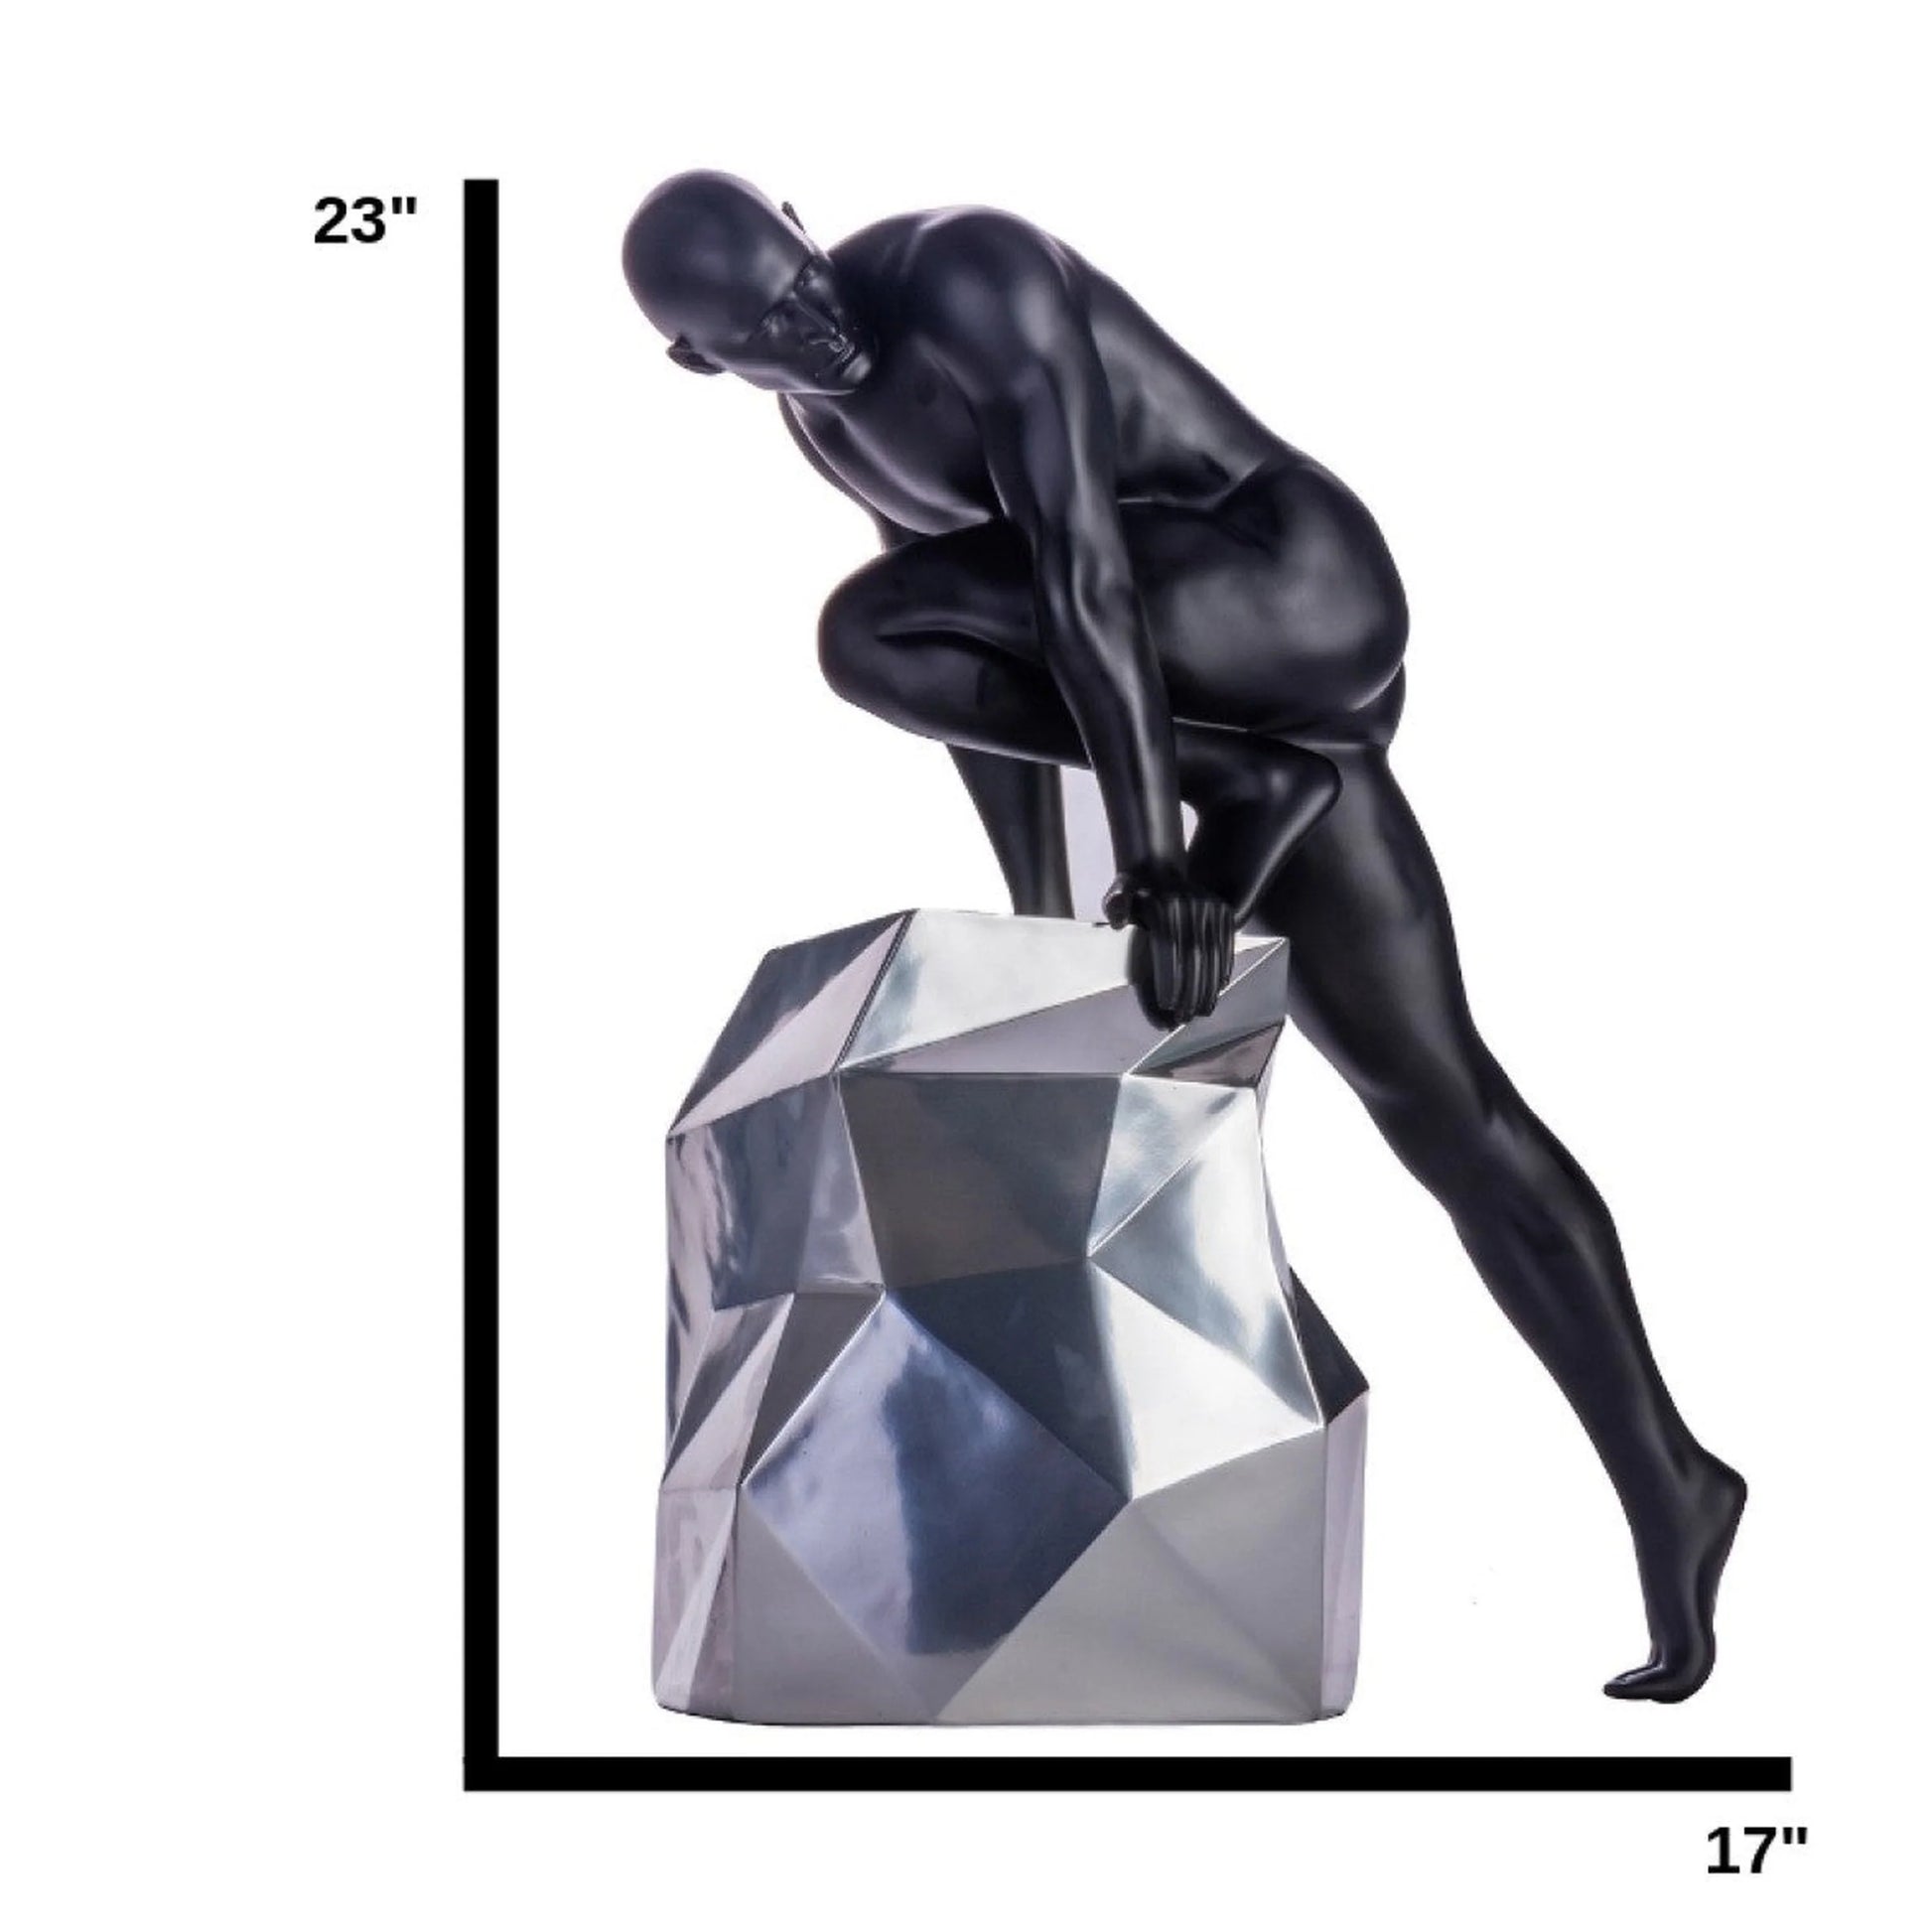 Sensuality Man Sculpture in Matte Black and Chrome 6